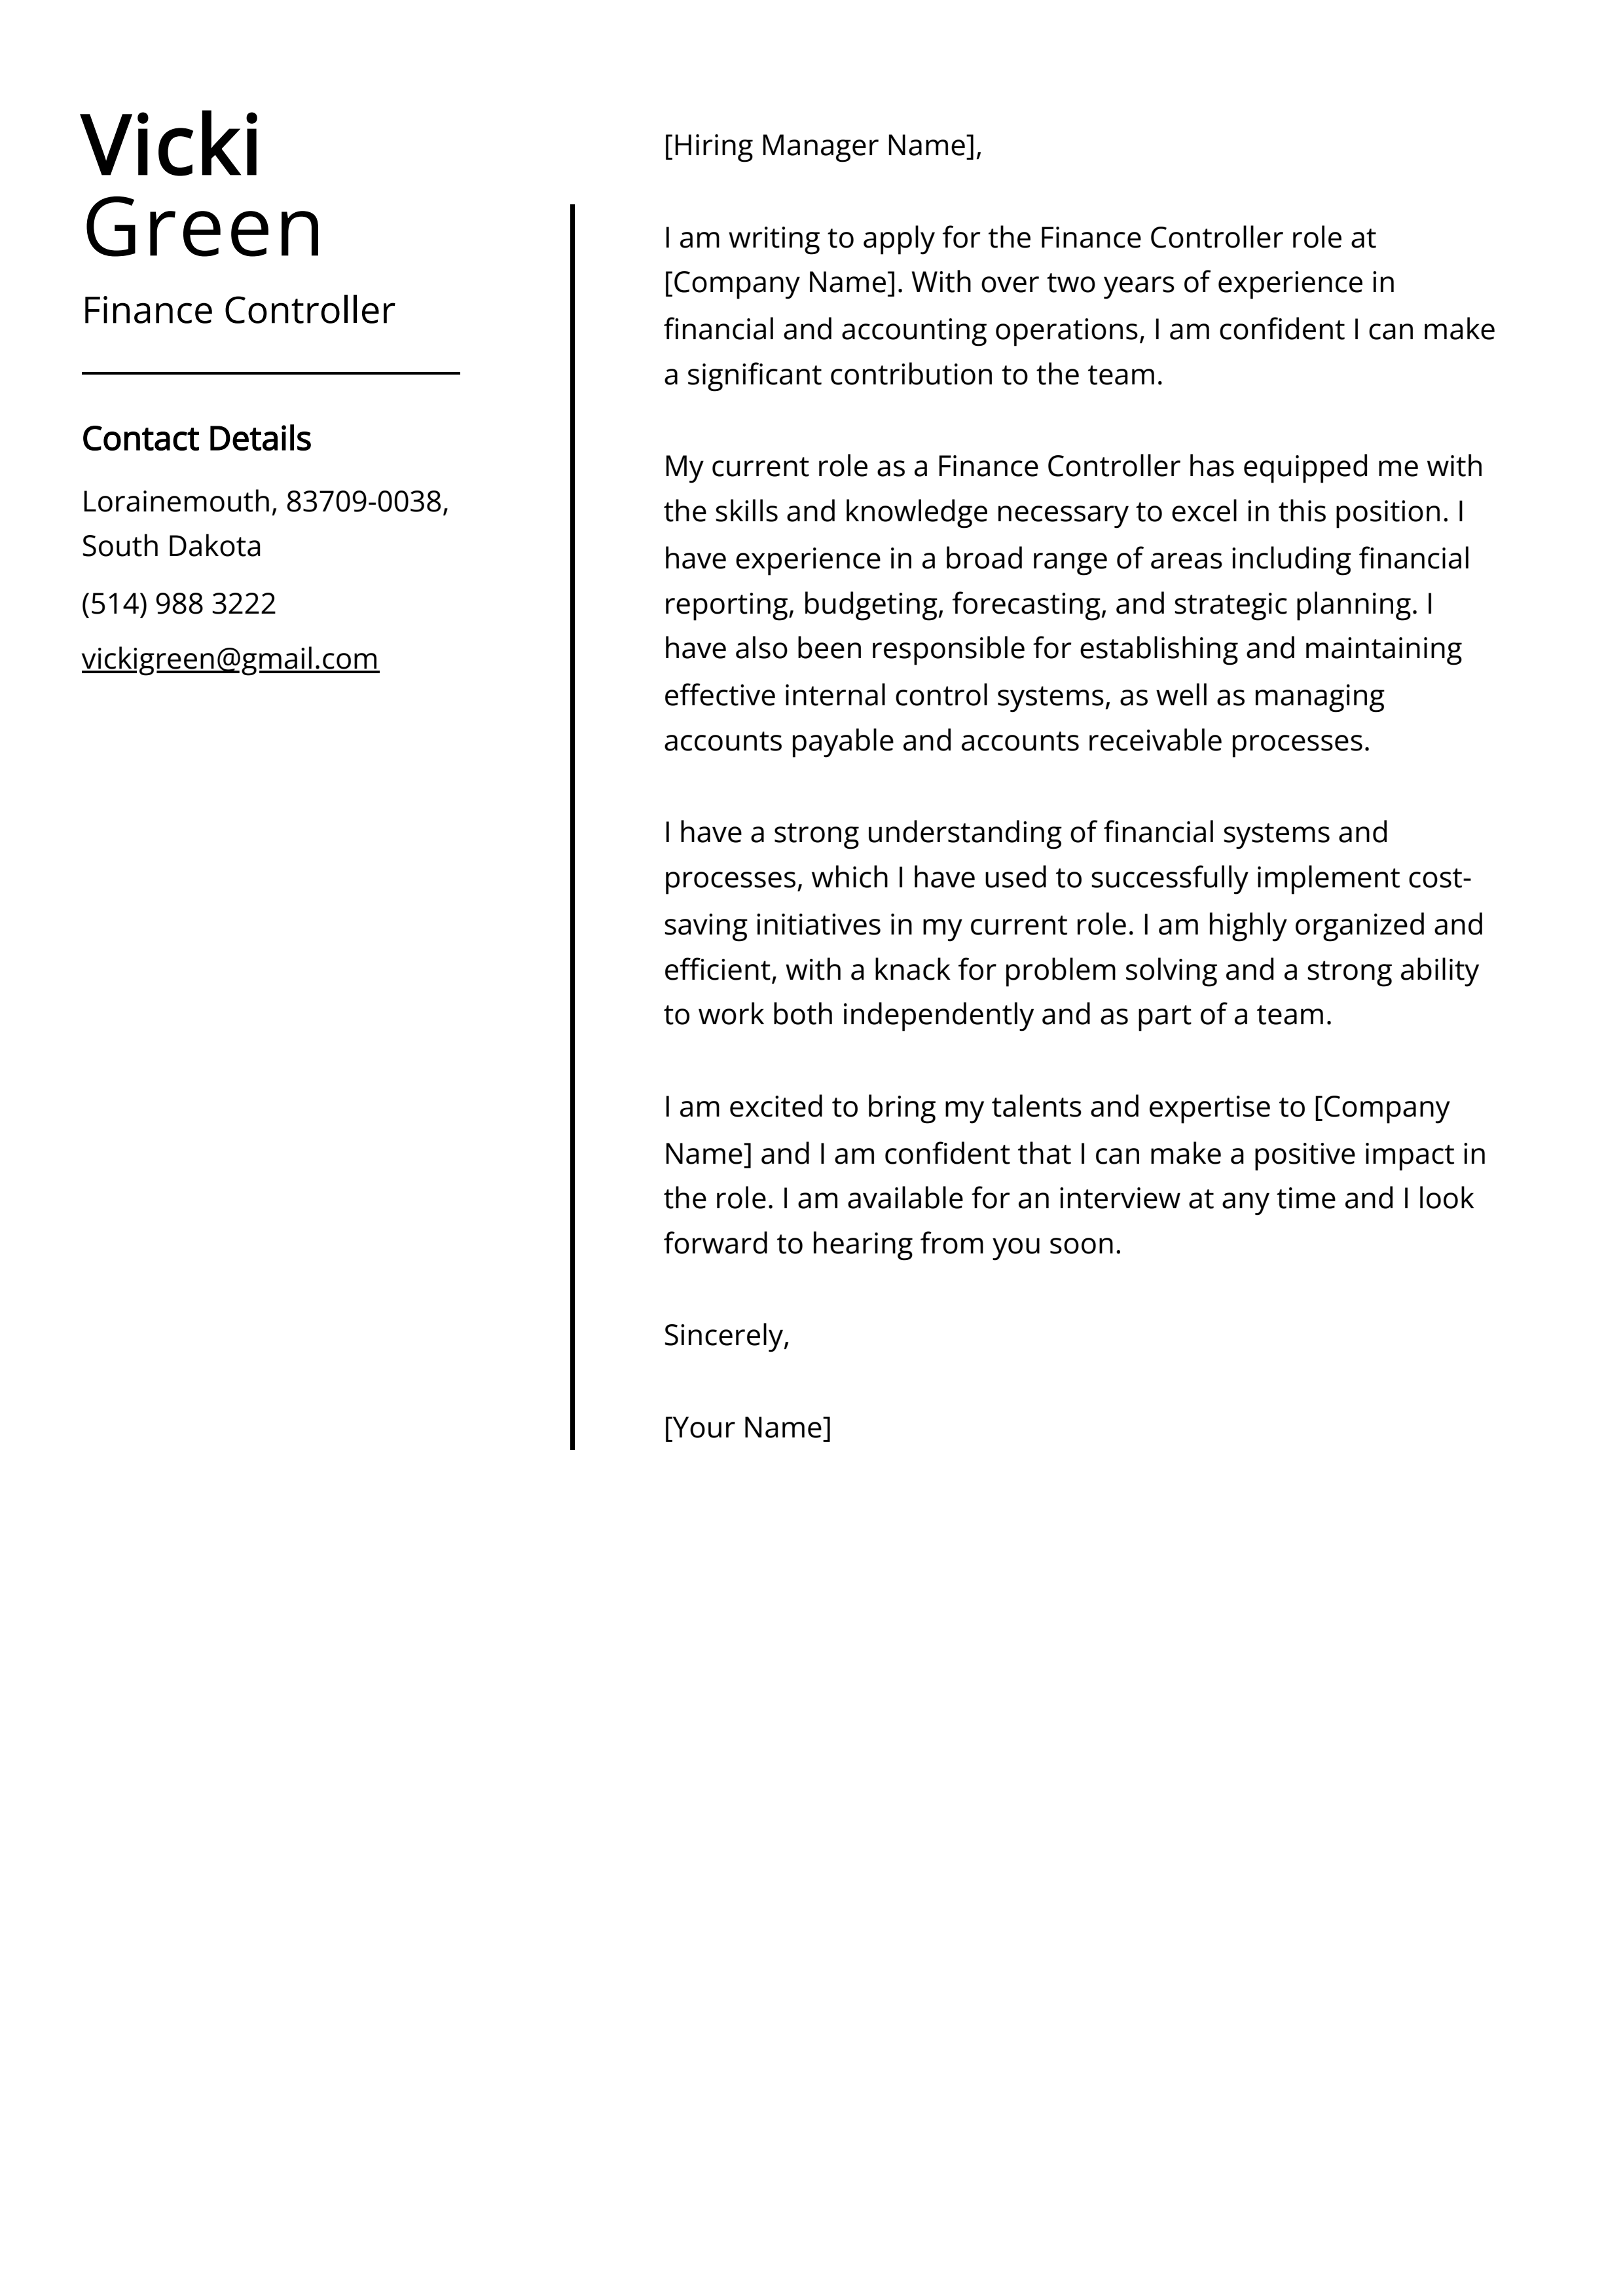 Finance Controller Cover Letter Example